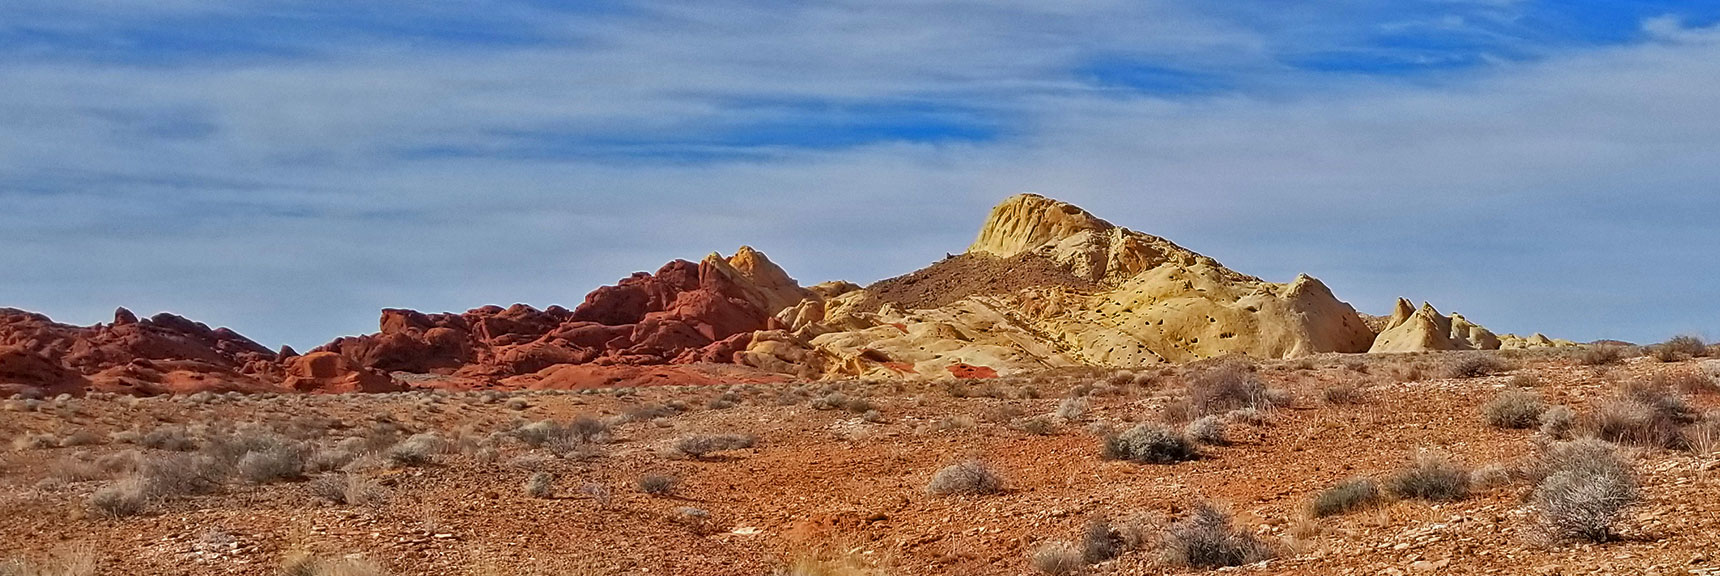 Approaching Fire Canyon Exit at Silica Dome in Valley of Fire State Park, Nevada